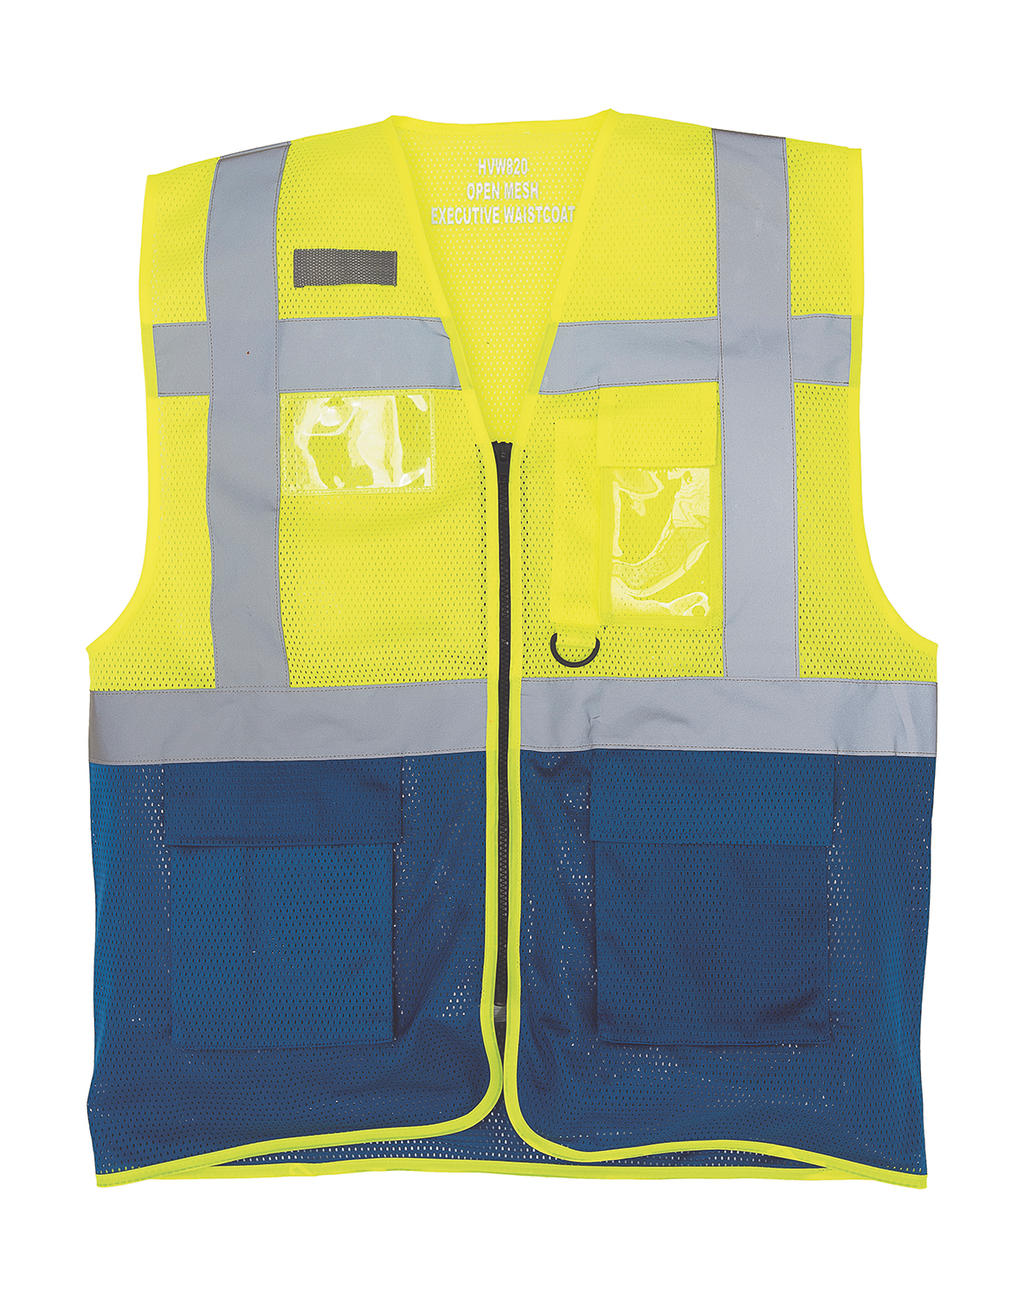  Fluo Open Mesh Executive Waistcoat in Farbe Fluo Yellow/Royal Blue